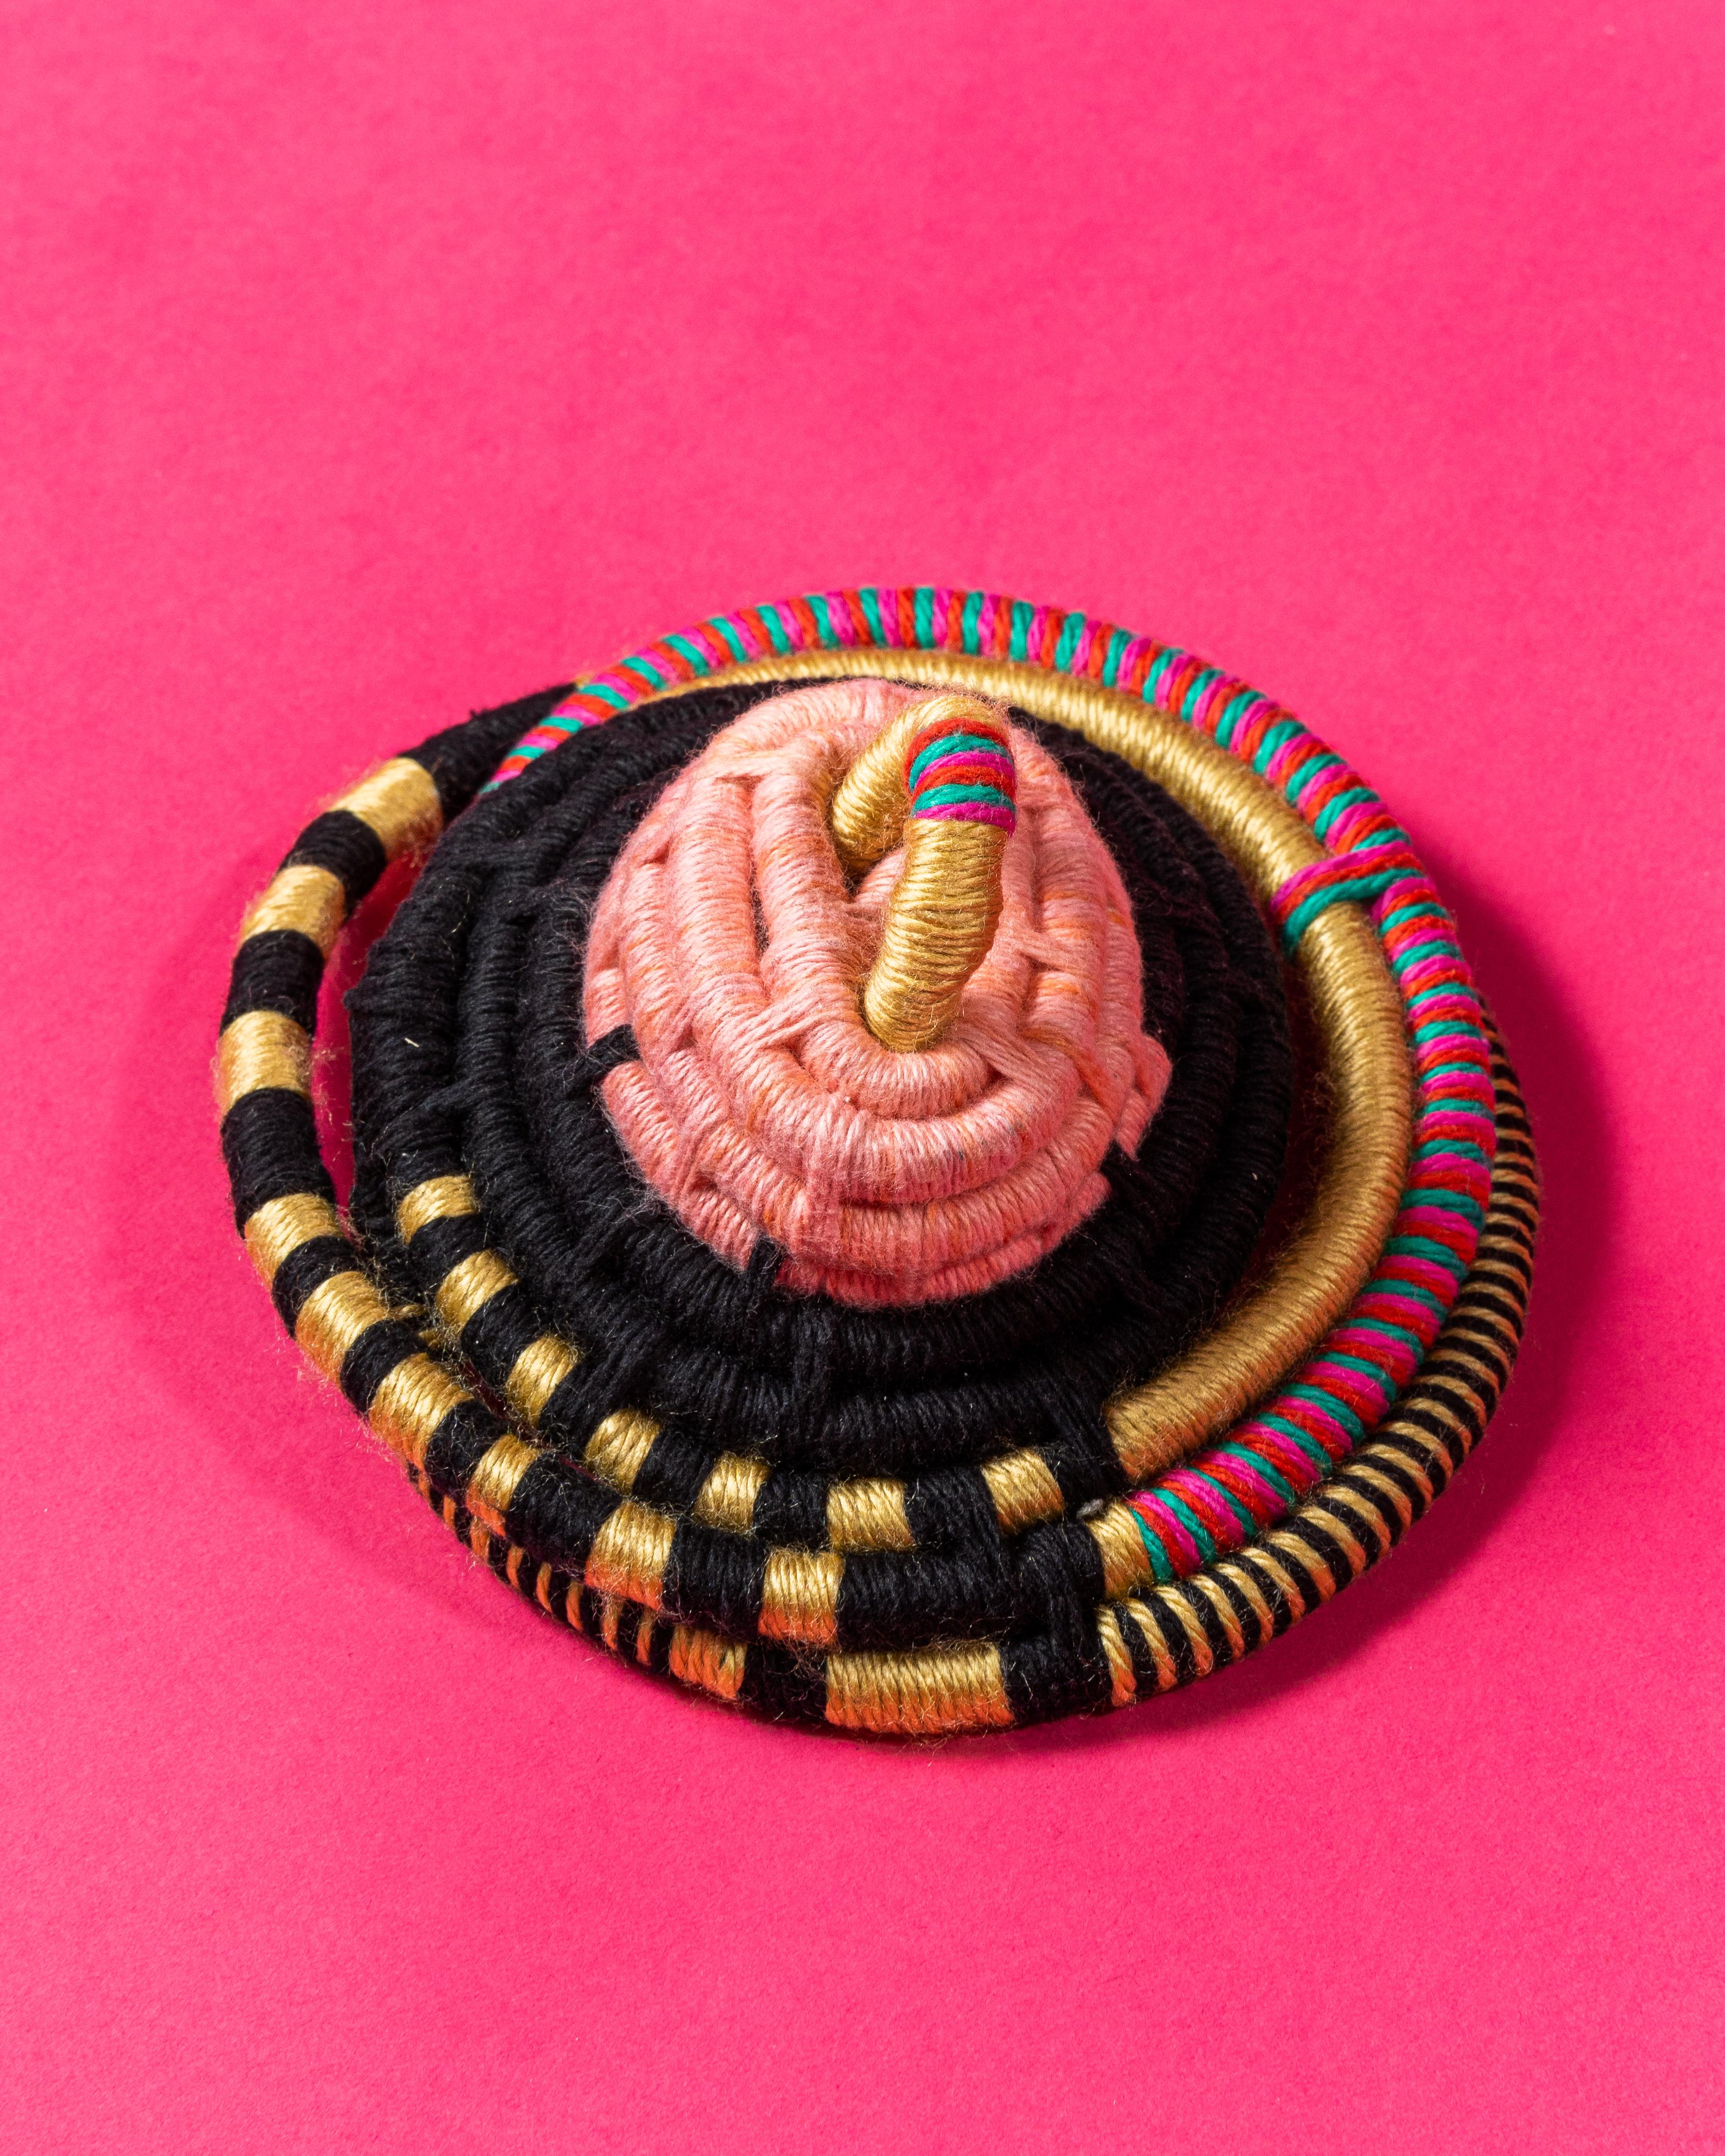 Coiling cord and cotton yarn textile sculpture.  Pink, gold, black, green, fuchsia fiber art, fine art basketry. 

This 